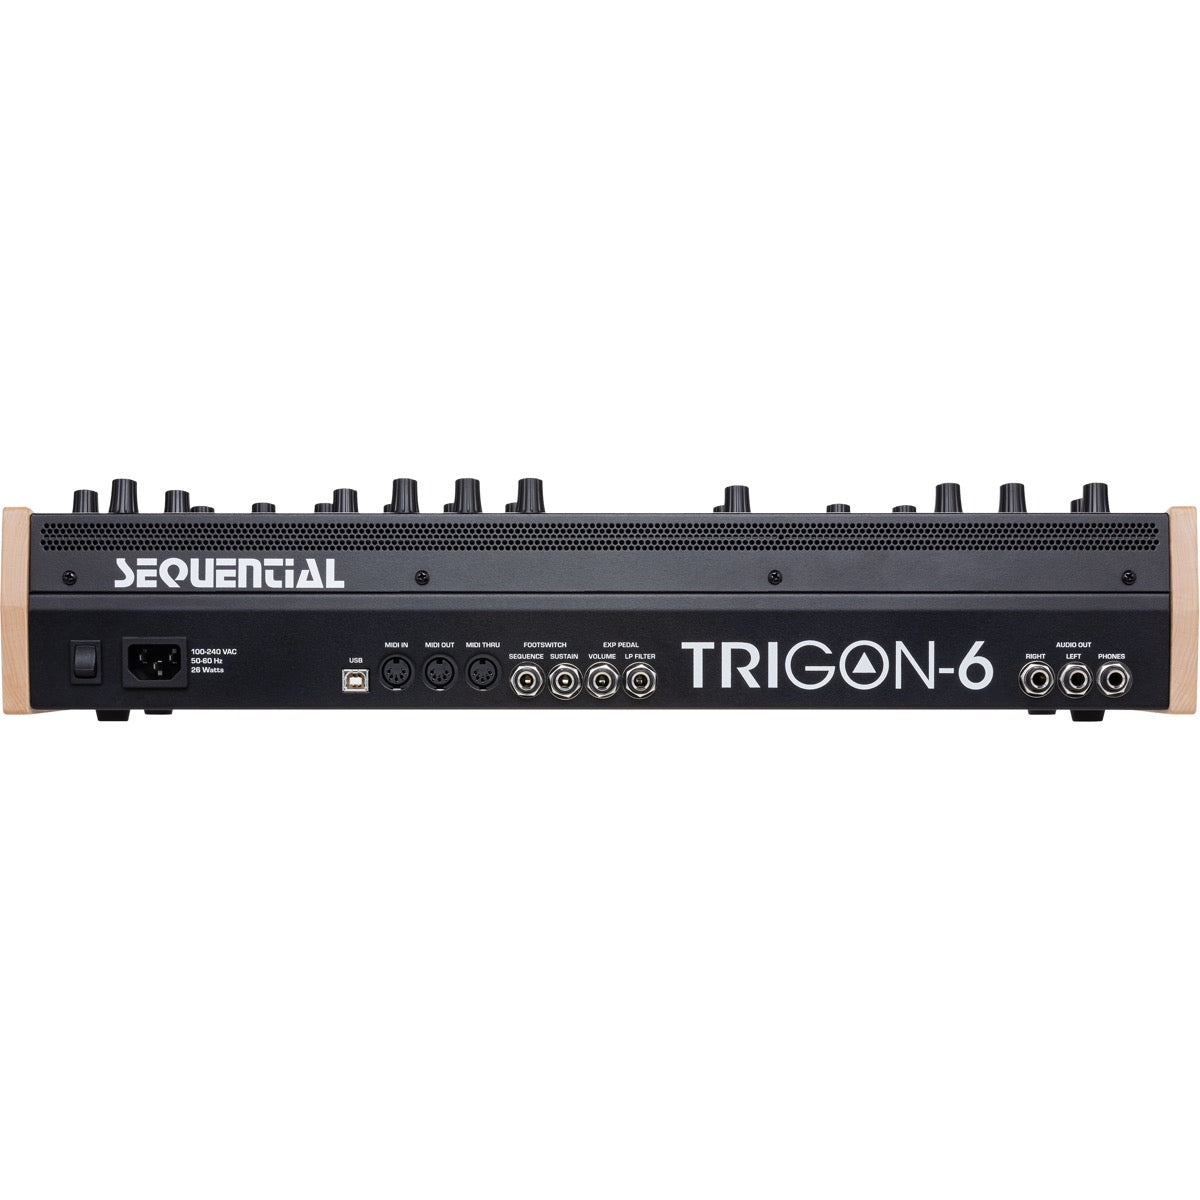 Sequential Trigon-6 Desktop Module Polyphonic Analog Synthesizer View 2